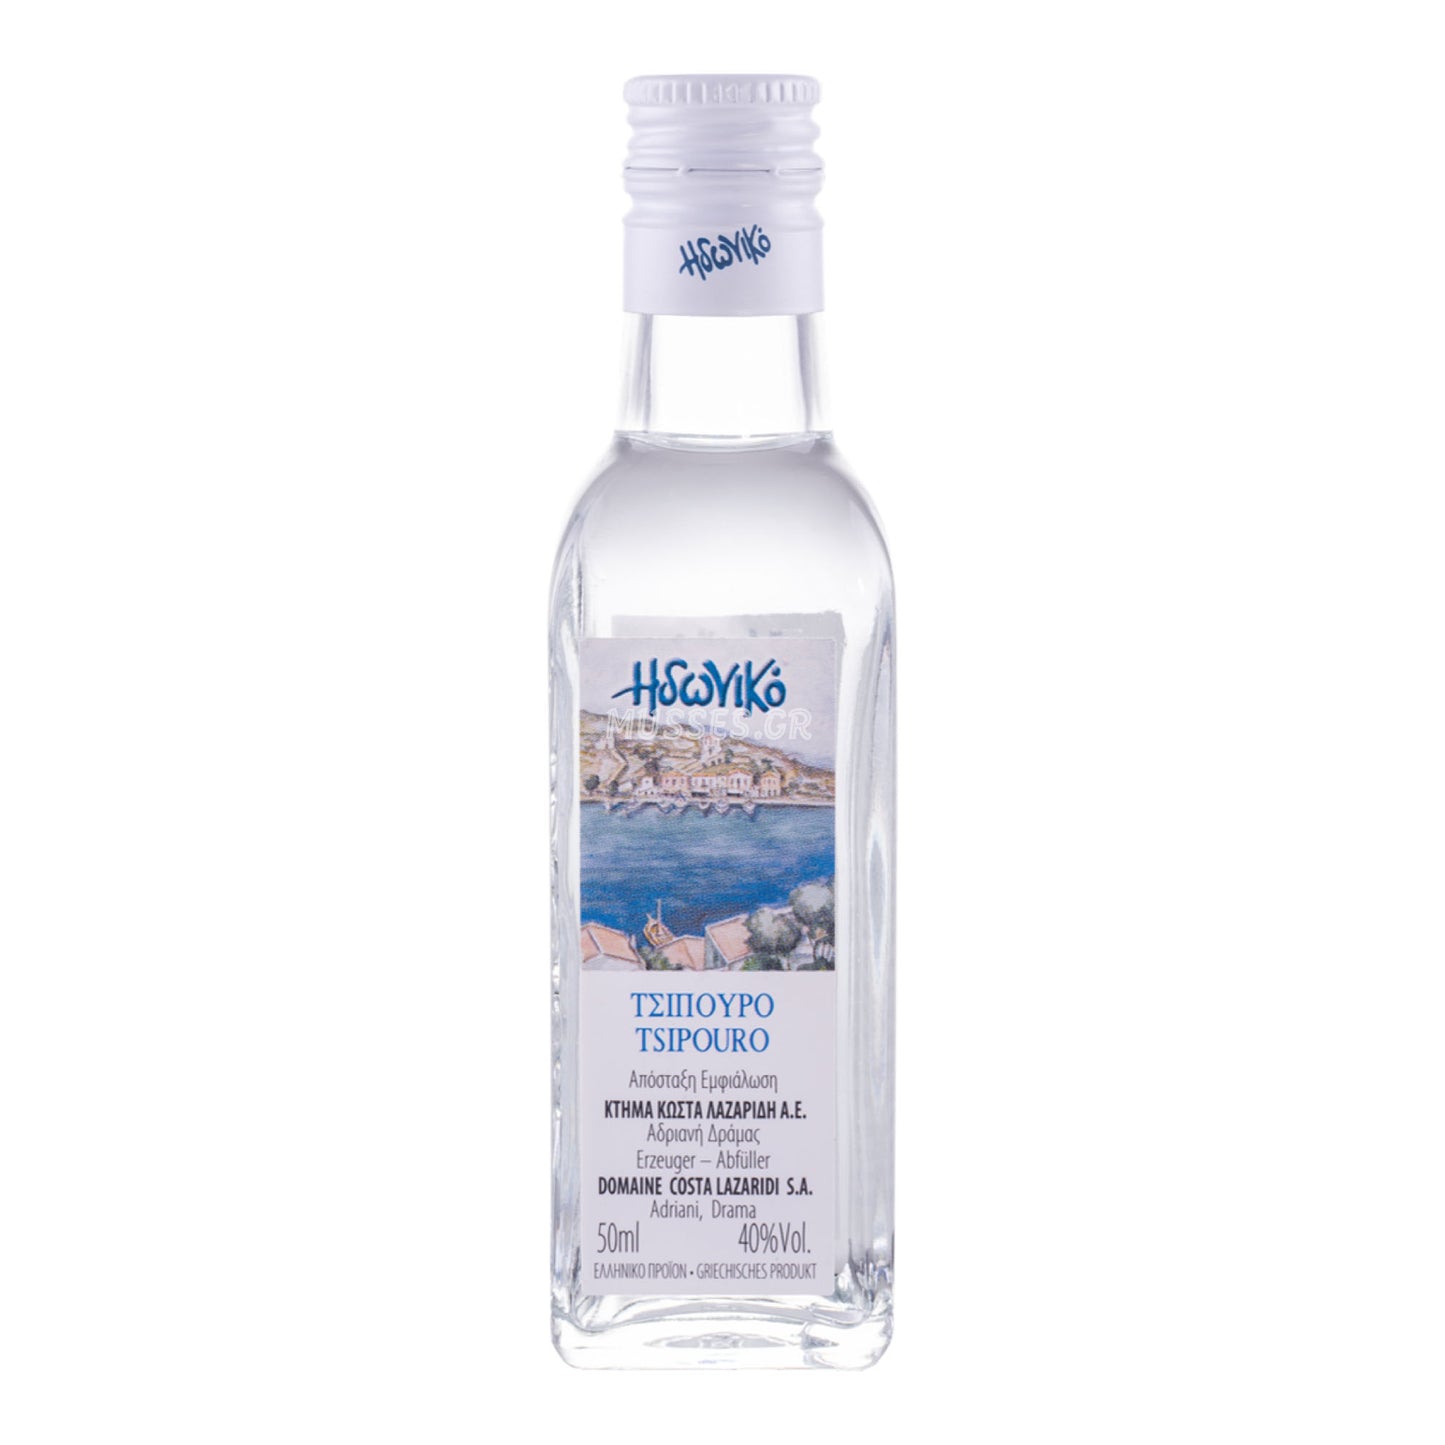 TSIPOURO IDEAL WITHOUT GLUCAN 50ml